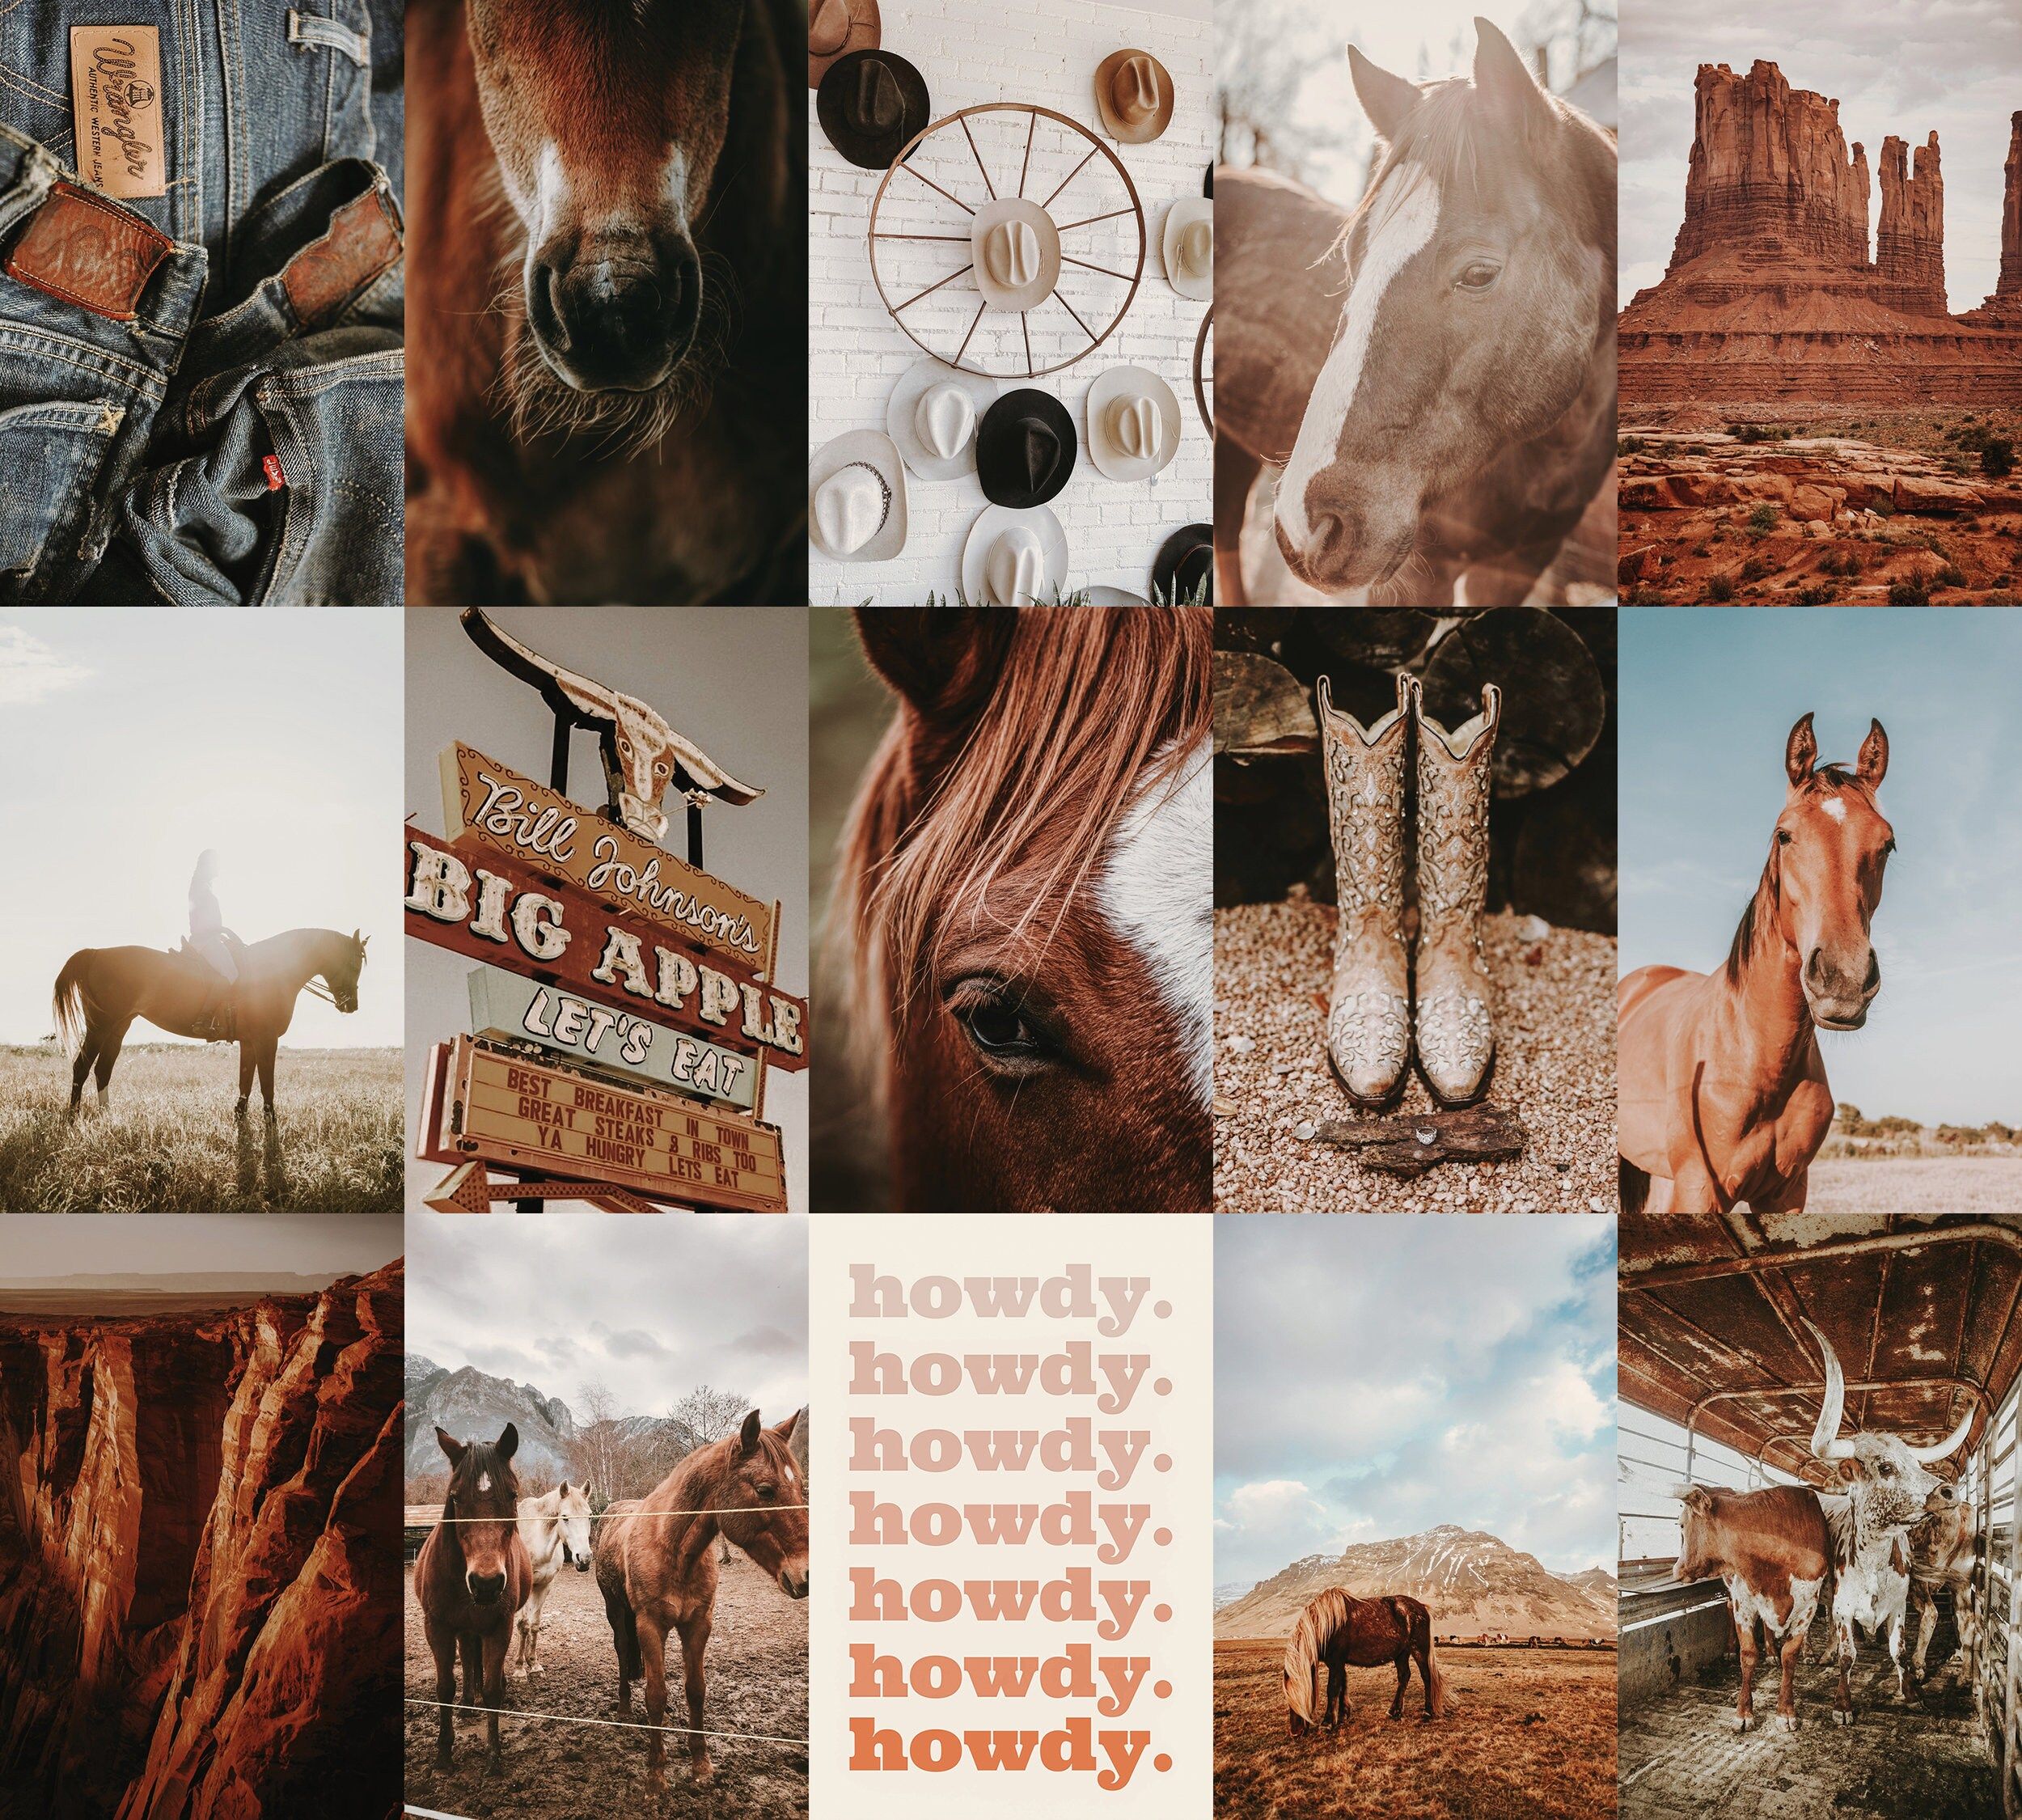  Hauspferd Hintergrundbild 2500x2250. Wild At Heart PRINTED 30 60pc COLLAGE KIT Western Aesthetic 4x6 Or 5x7 Photo Cards Physical Collage Prints Wall Art